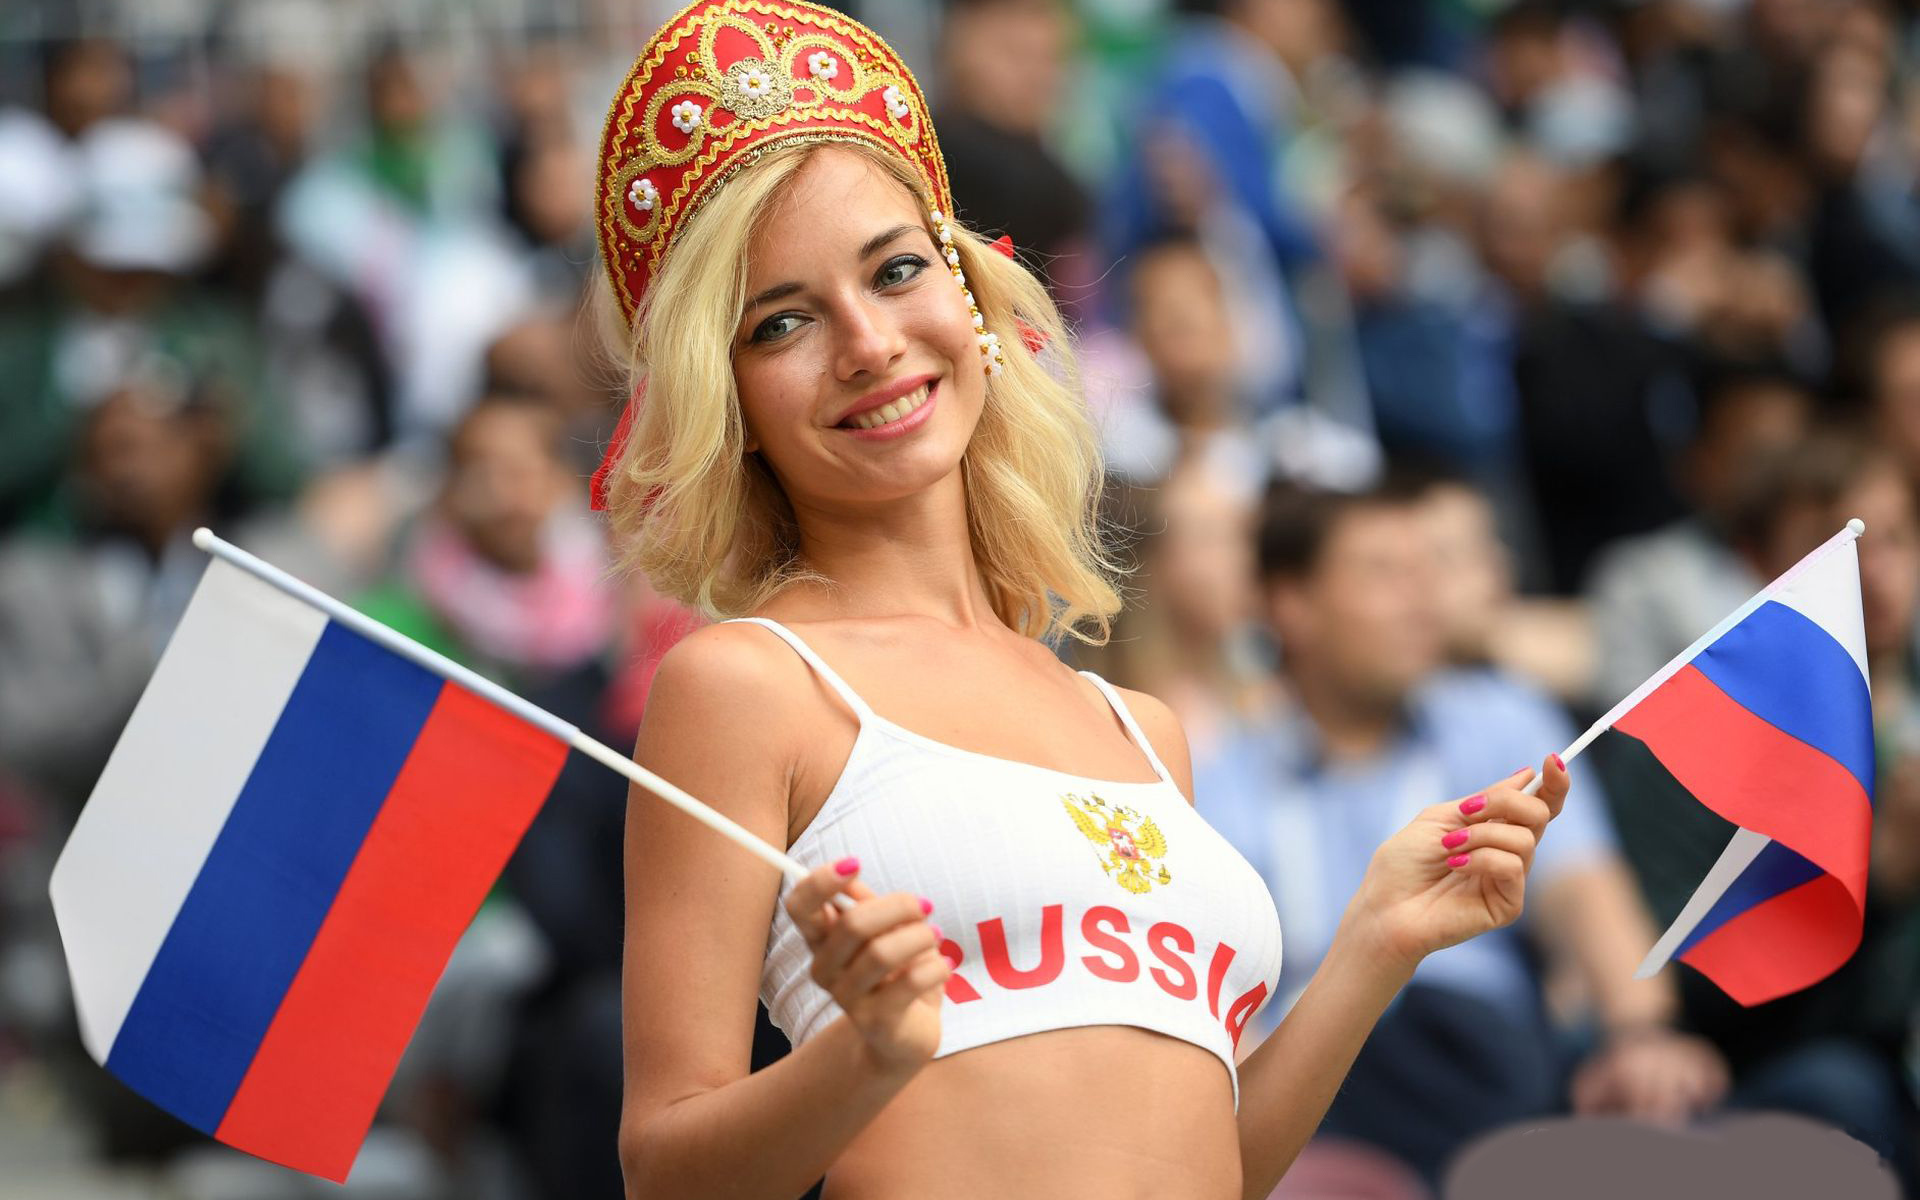 футбол, девушка, девушки, чемпионат, мира, спорт, 2018, football, sport, girl, girls, world, cup, reserve squad of the national team of russia, dress, short, white, front, solar, smile, lips, eyes, see, nice, wide